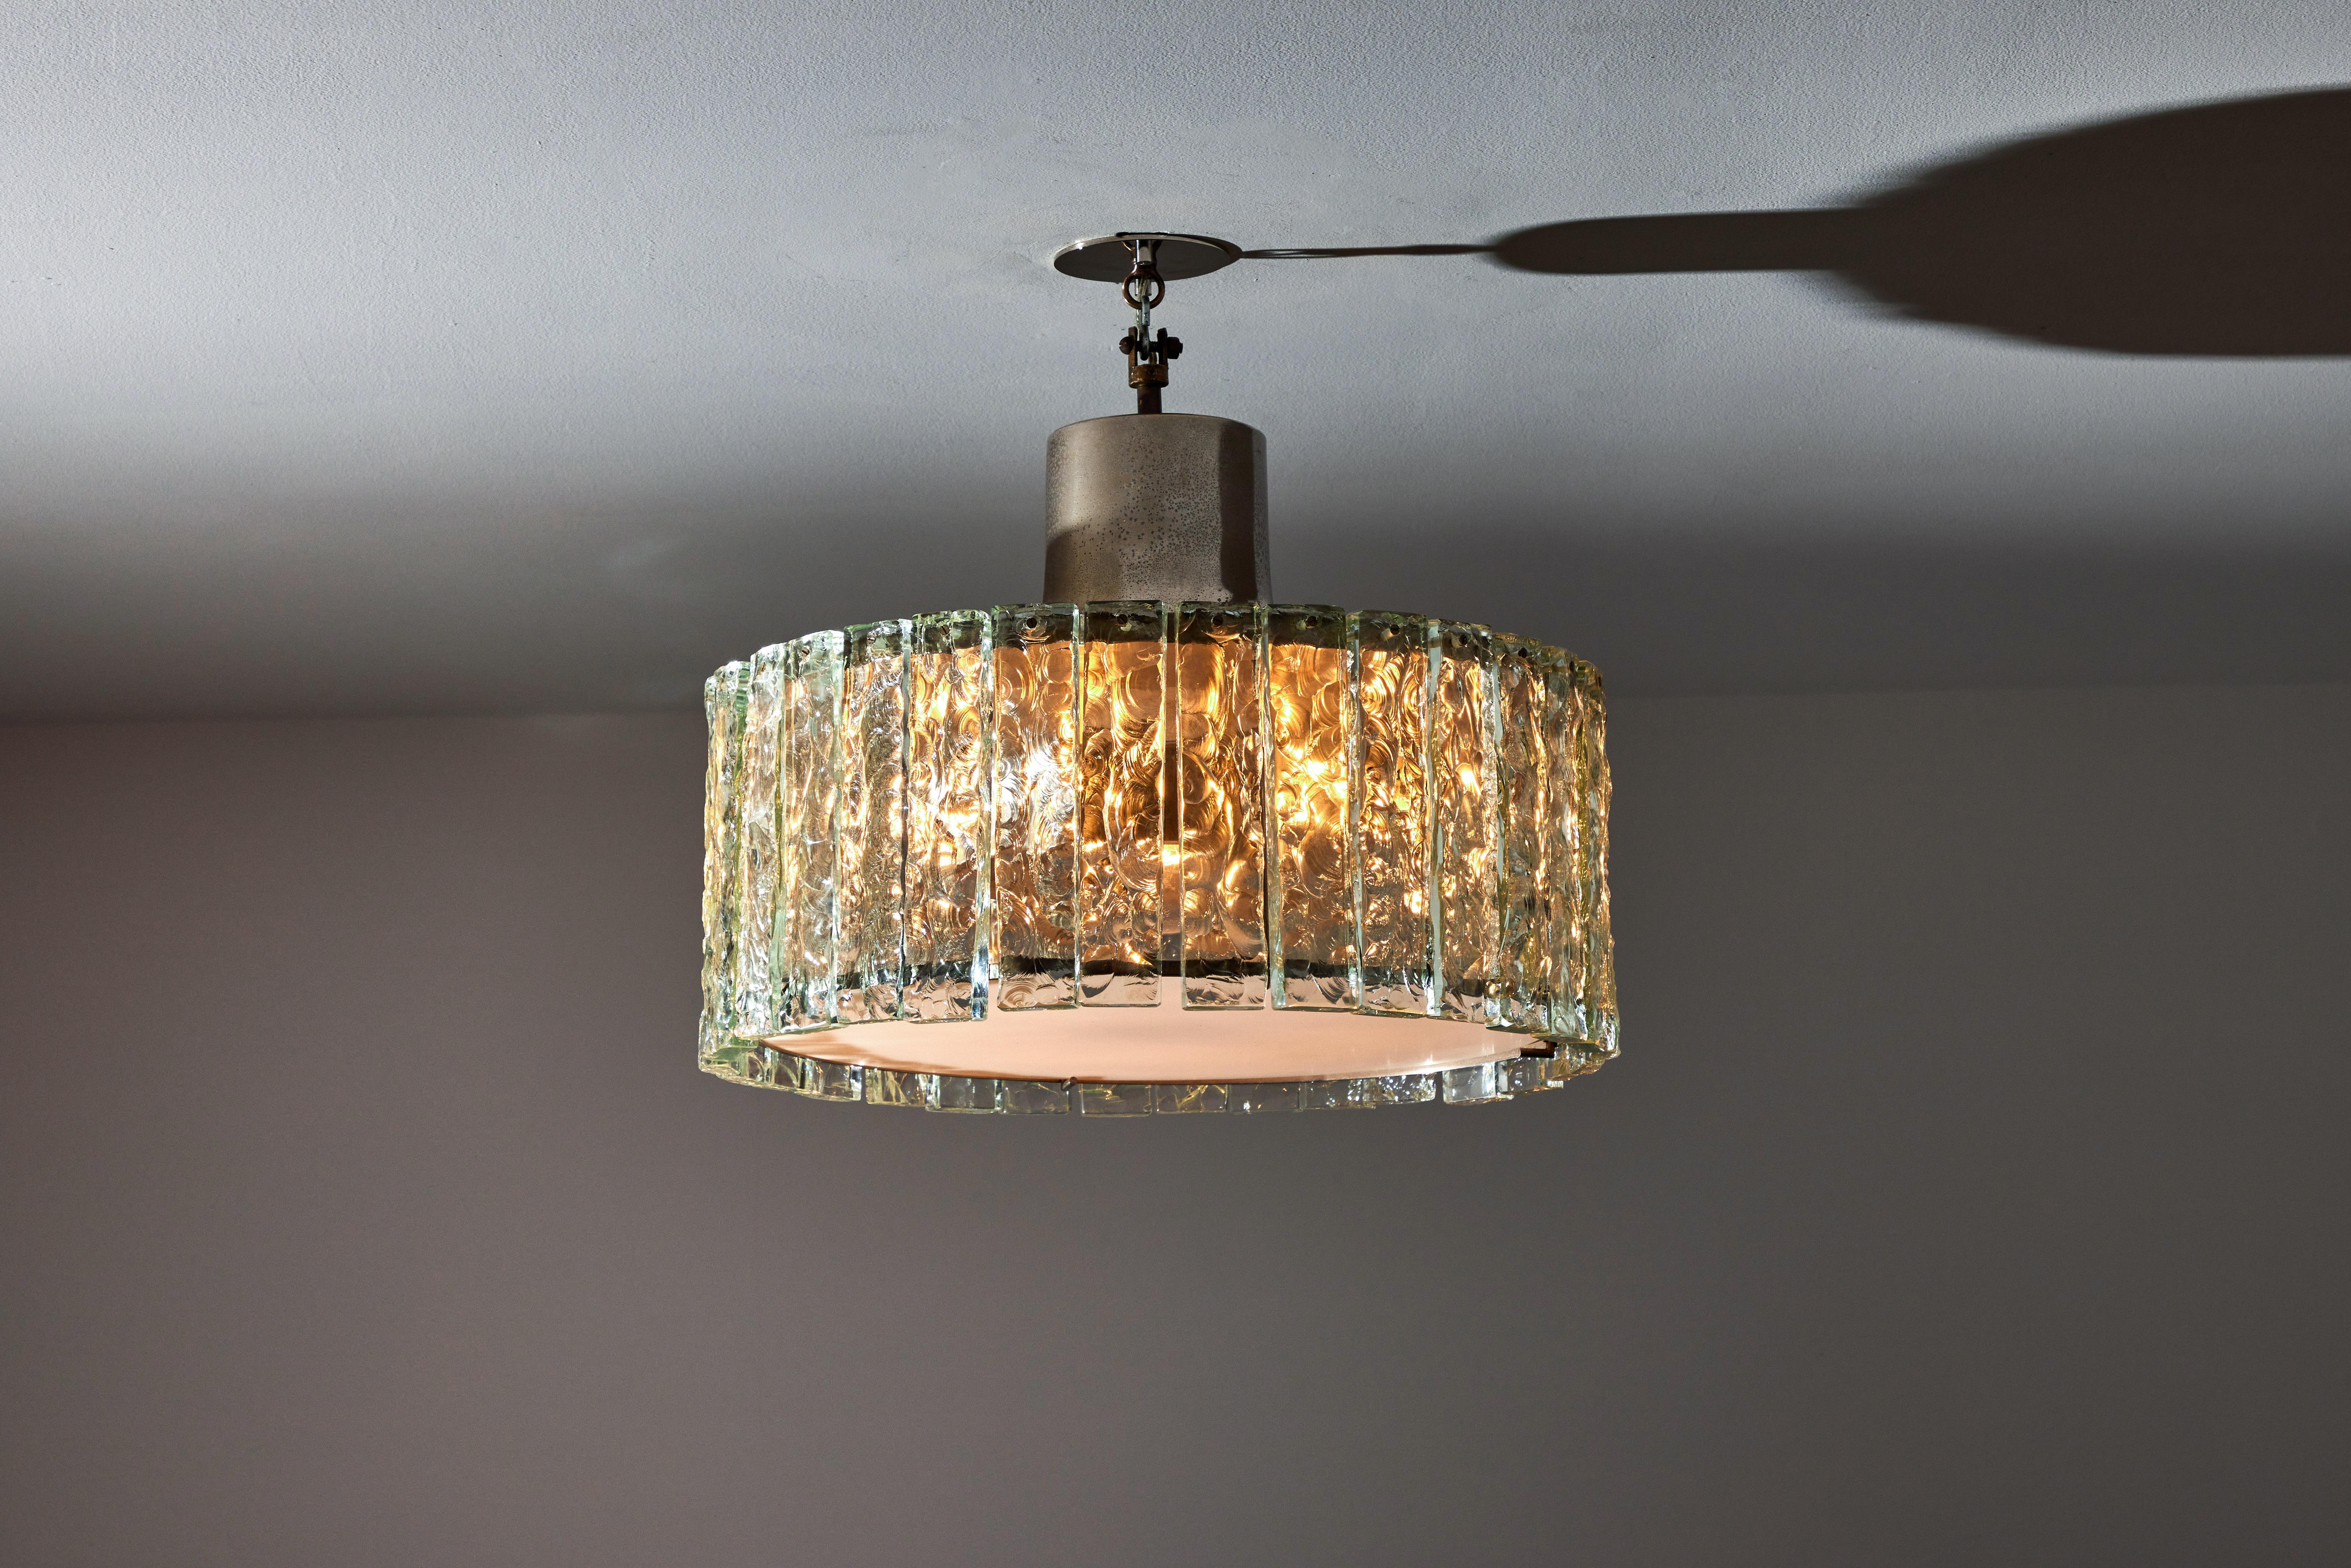 Ceiling light by Max Ingrand for Fontana Arte. Manufactured in Italy, circa 1950's. Crystal, chrome, glass, custom brass backplate. Wired for U.S. standards. We recommend eight E14 25w maximum bulbs. Bulbs provided as a one time courtesy.